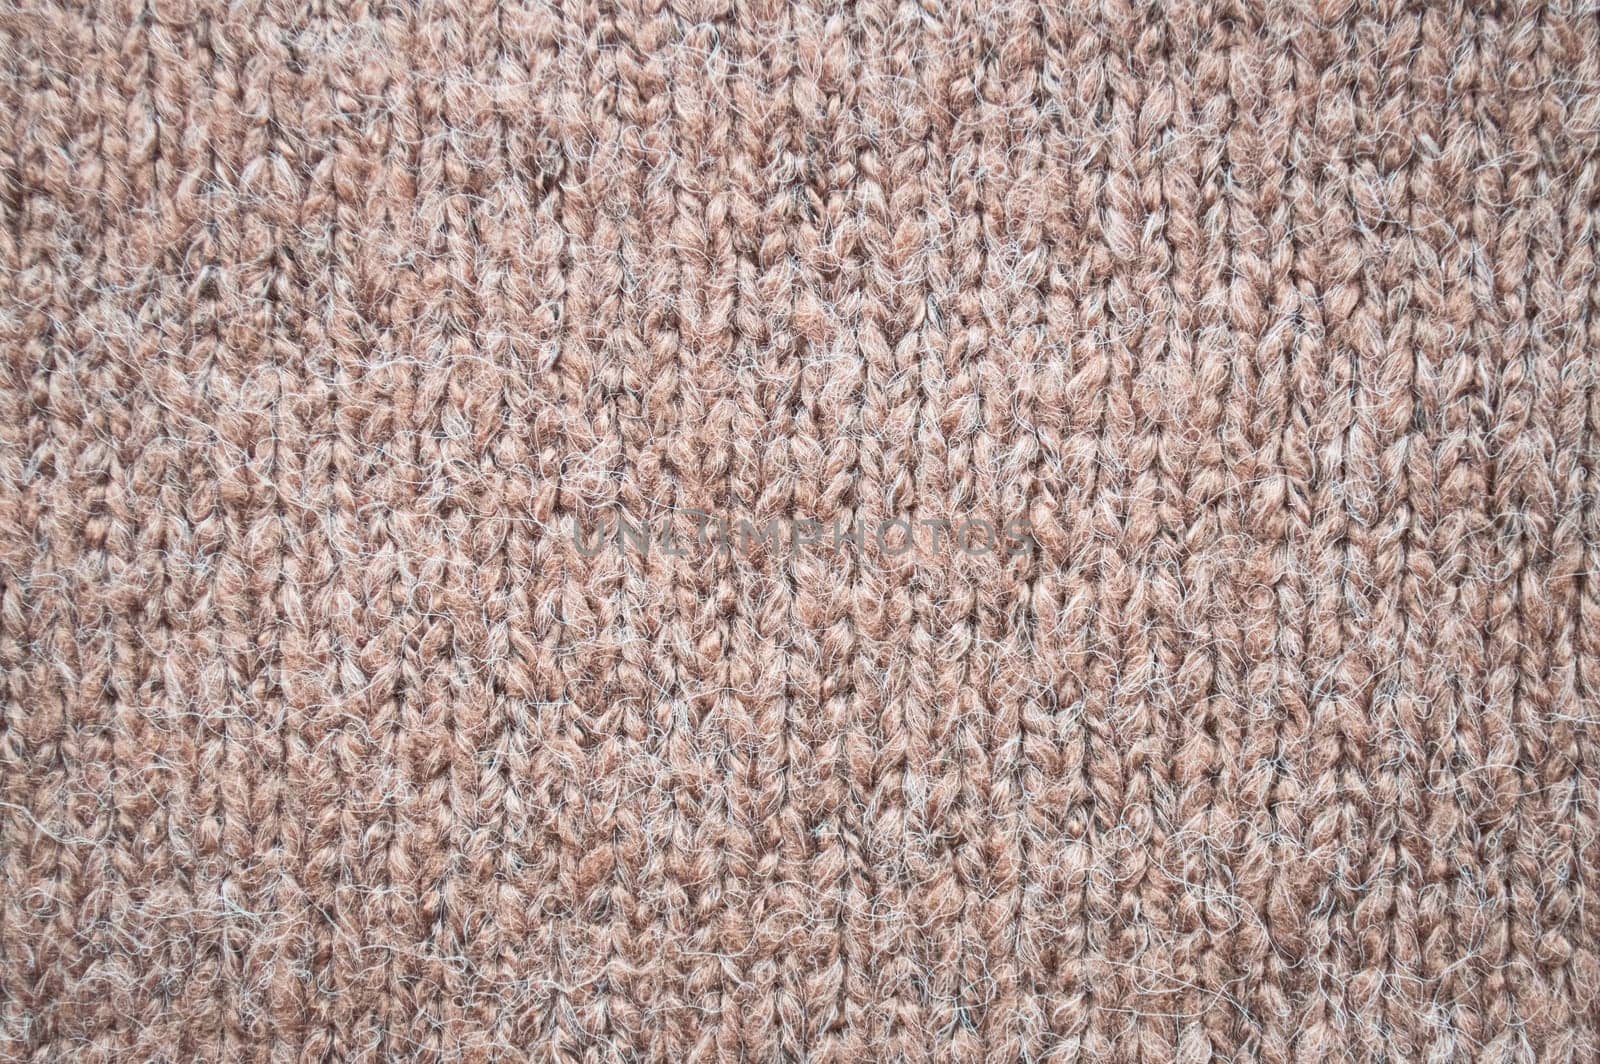 Knitted Texture. Organic Woven Pattern. Handmade Xmas Background. Woolen Knitting Texture. Linen Thread. Nordic Warm Cloth. Macro Canvas Material. Detail Knitted Texture.